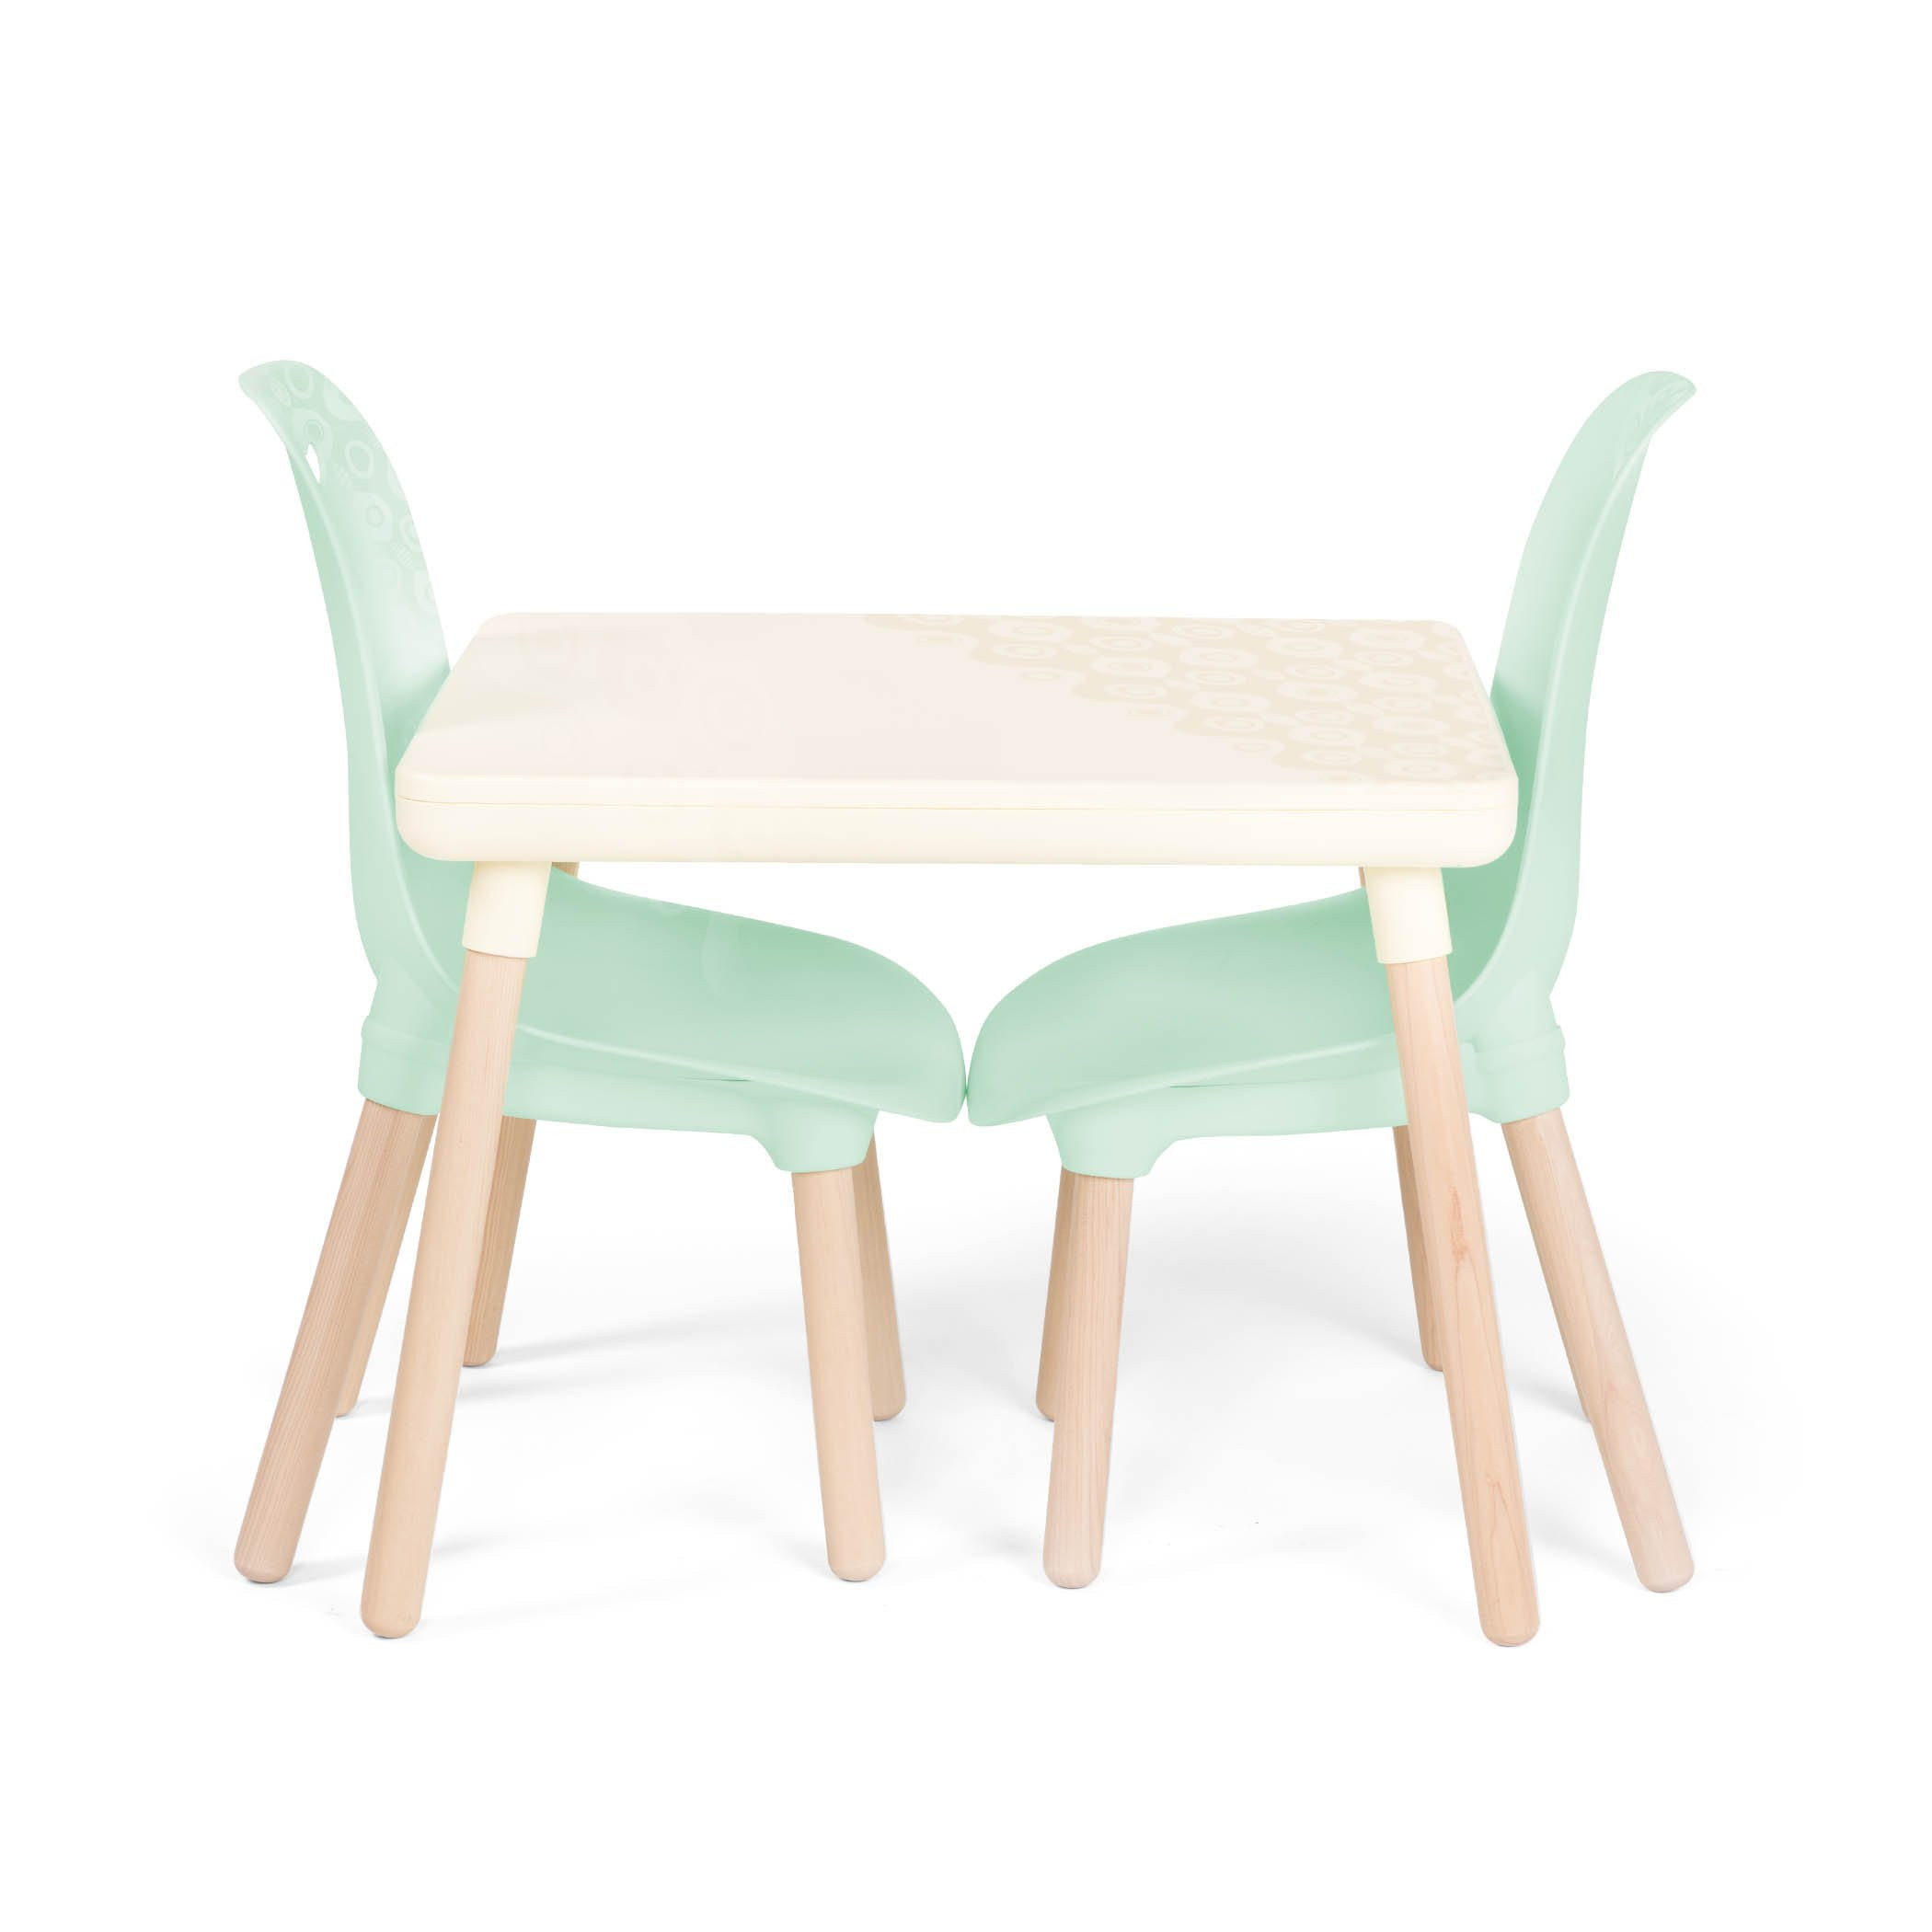 Modern Kids Table And Chair
 B spaces by Battat – Kid Century Modern Trendy Kids